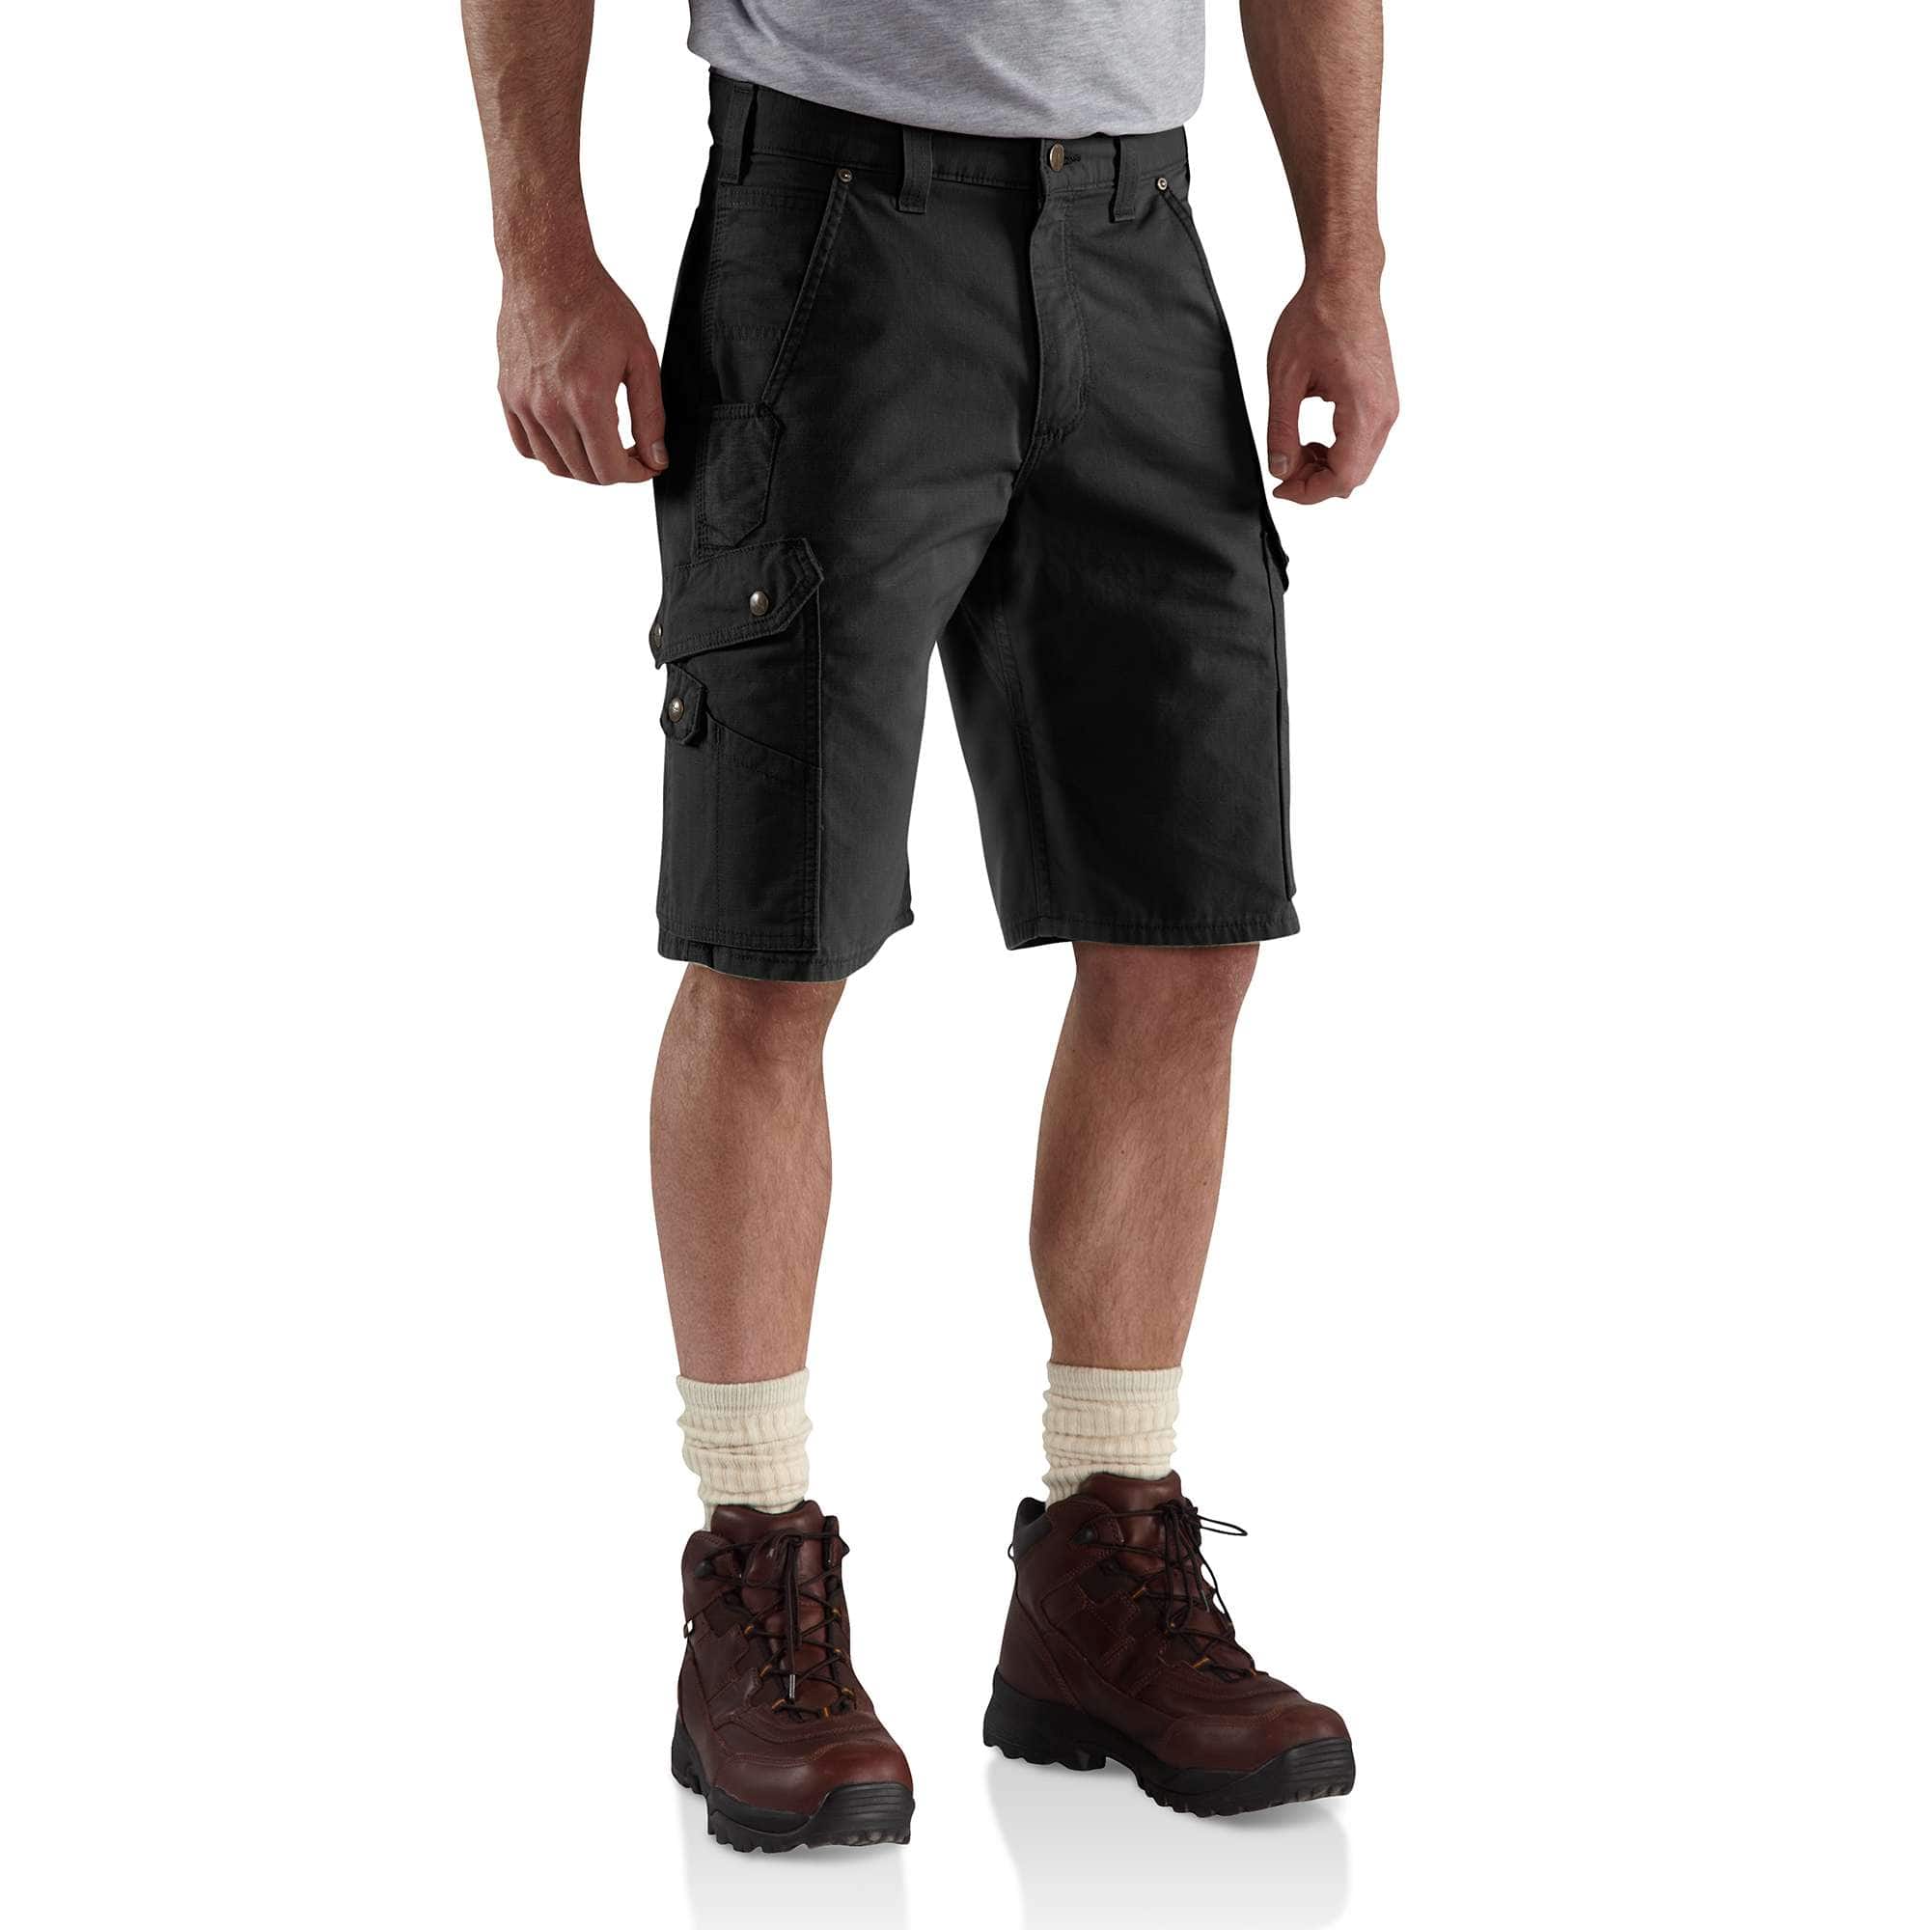 carhartt relaxed fit ripstop cargo work pant